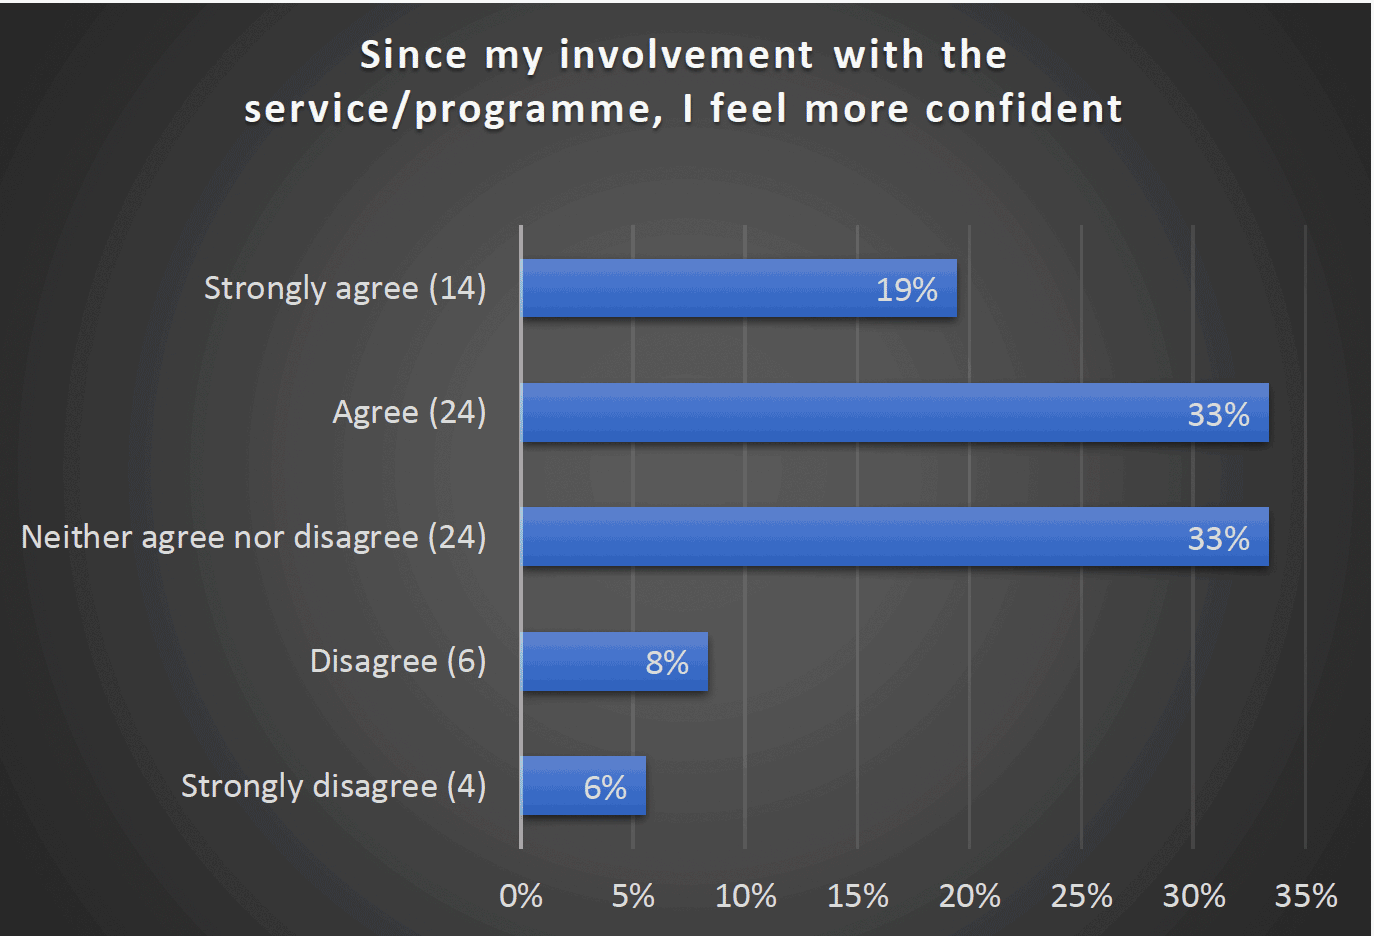 Since my involvement with the service/programme, I feel more confident - Strongly agree (14) 19%, Agree (24) 33%, Neither agree nor disagree (24) 33%, Disagree (6) 8%, Strongly disagree (4) 6%